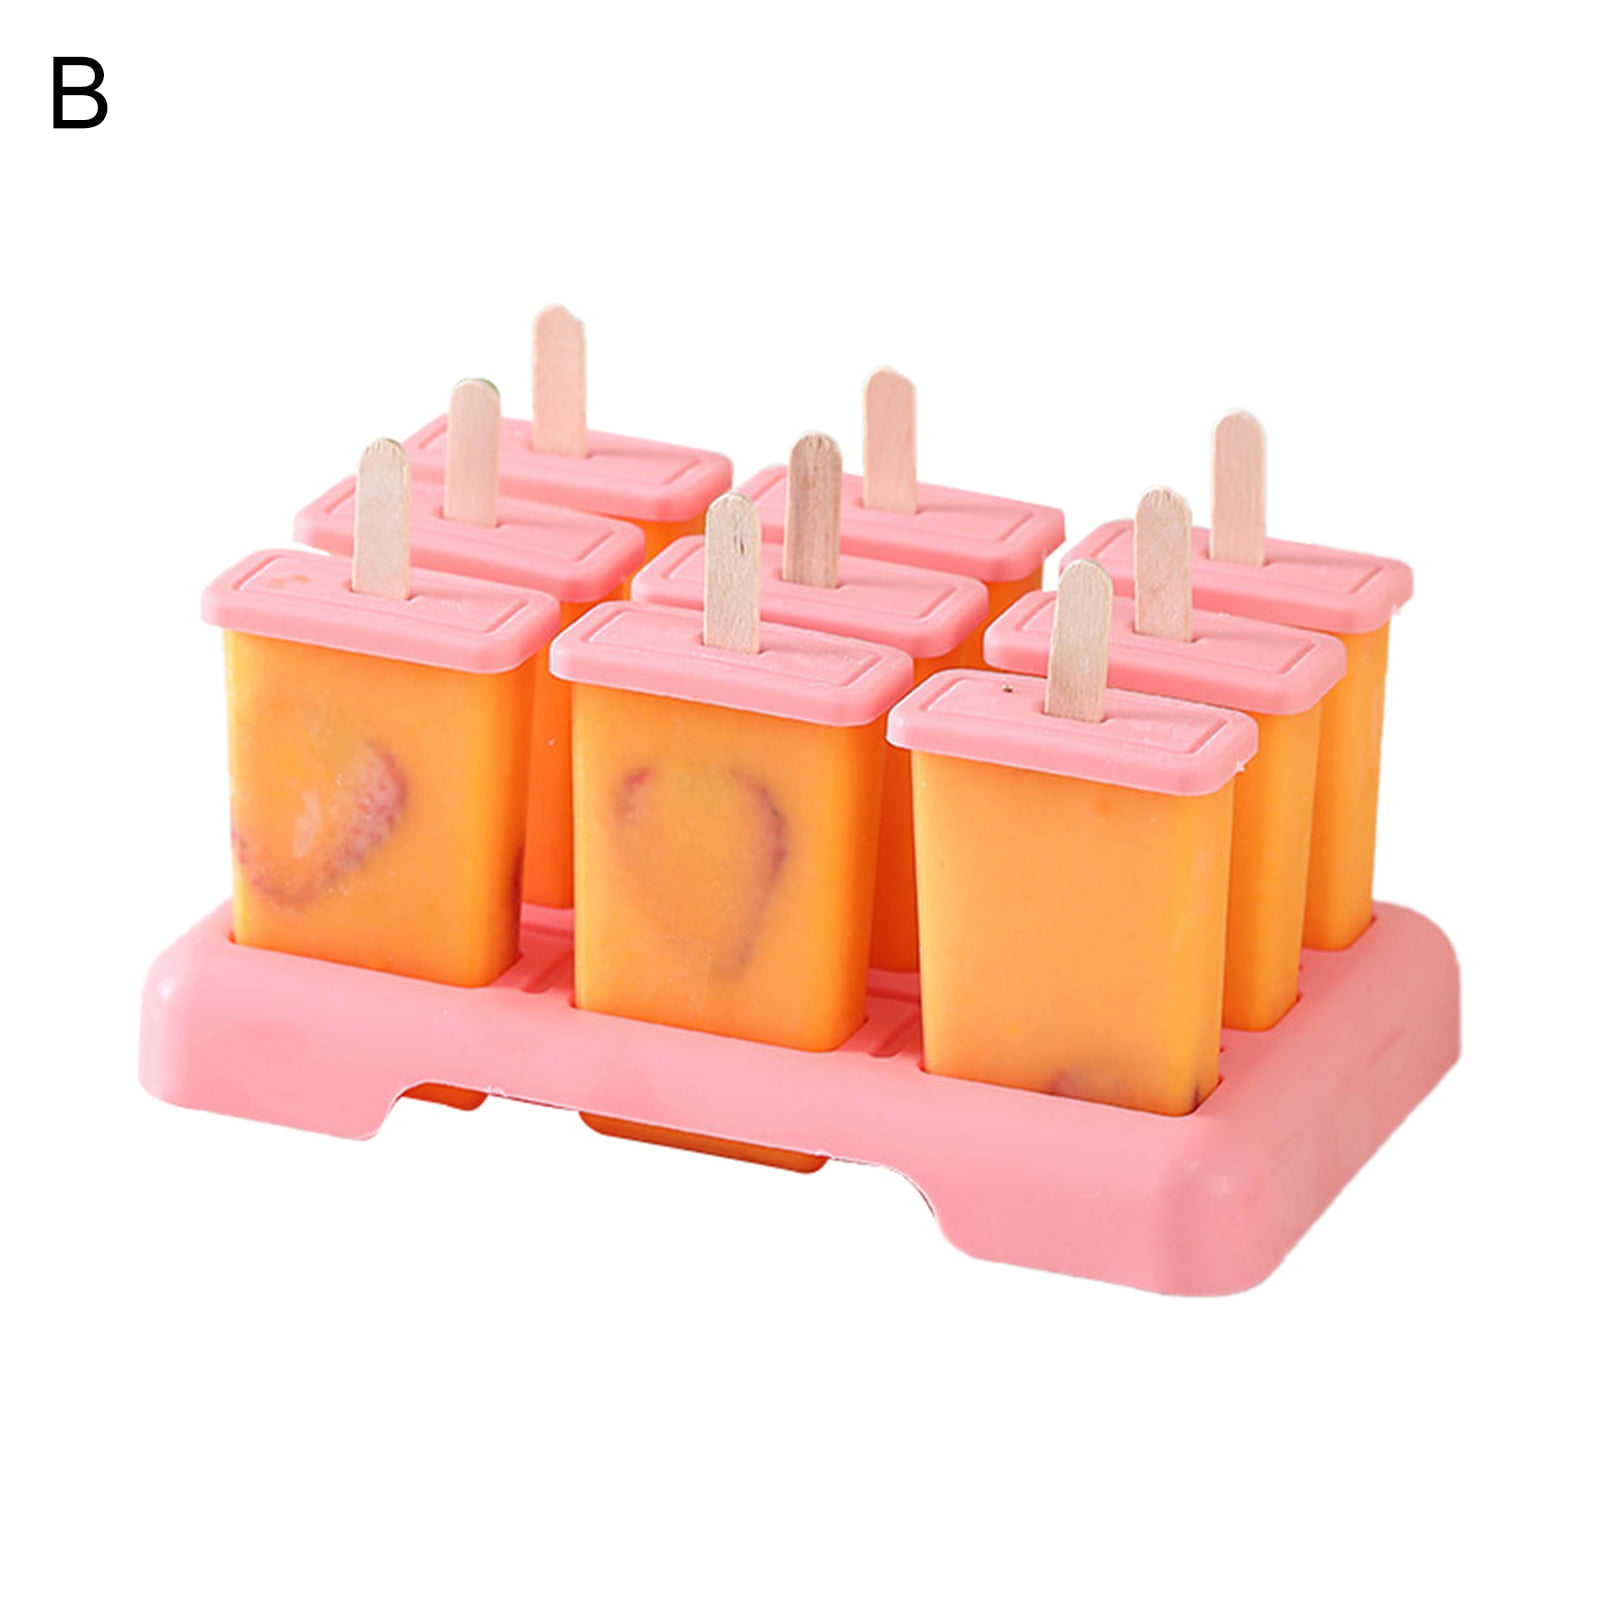  Silicone Baby Popsicle Molds BPA Free - Ice Pop Molds for  Infant and Kids - Mini Lolly Mould Maker - Small Popsicle Mold Makers by  Eparé: Home & Kitchen